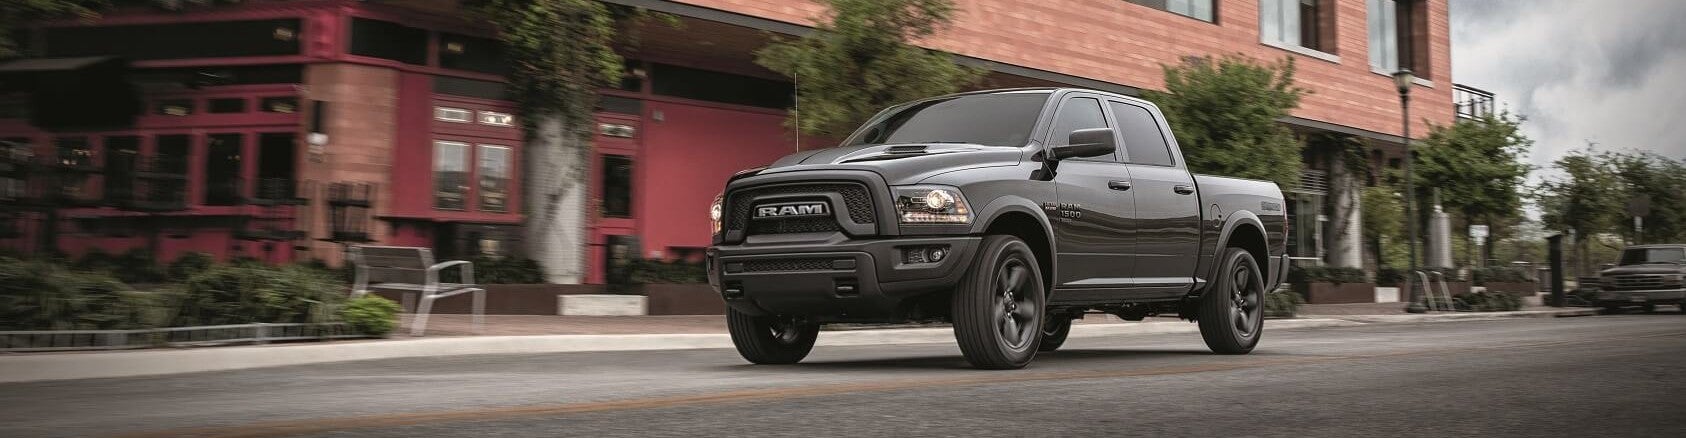 Ram 1500 Lease Deals near Indianapolis IN